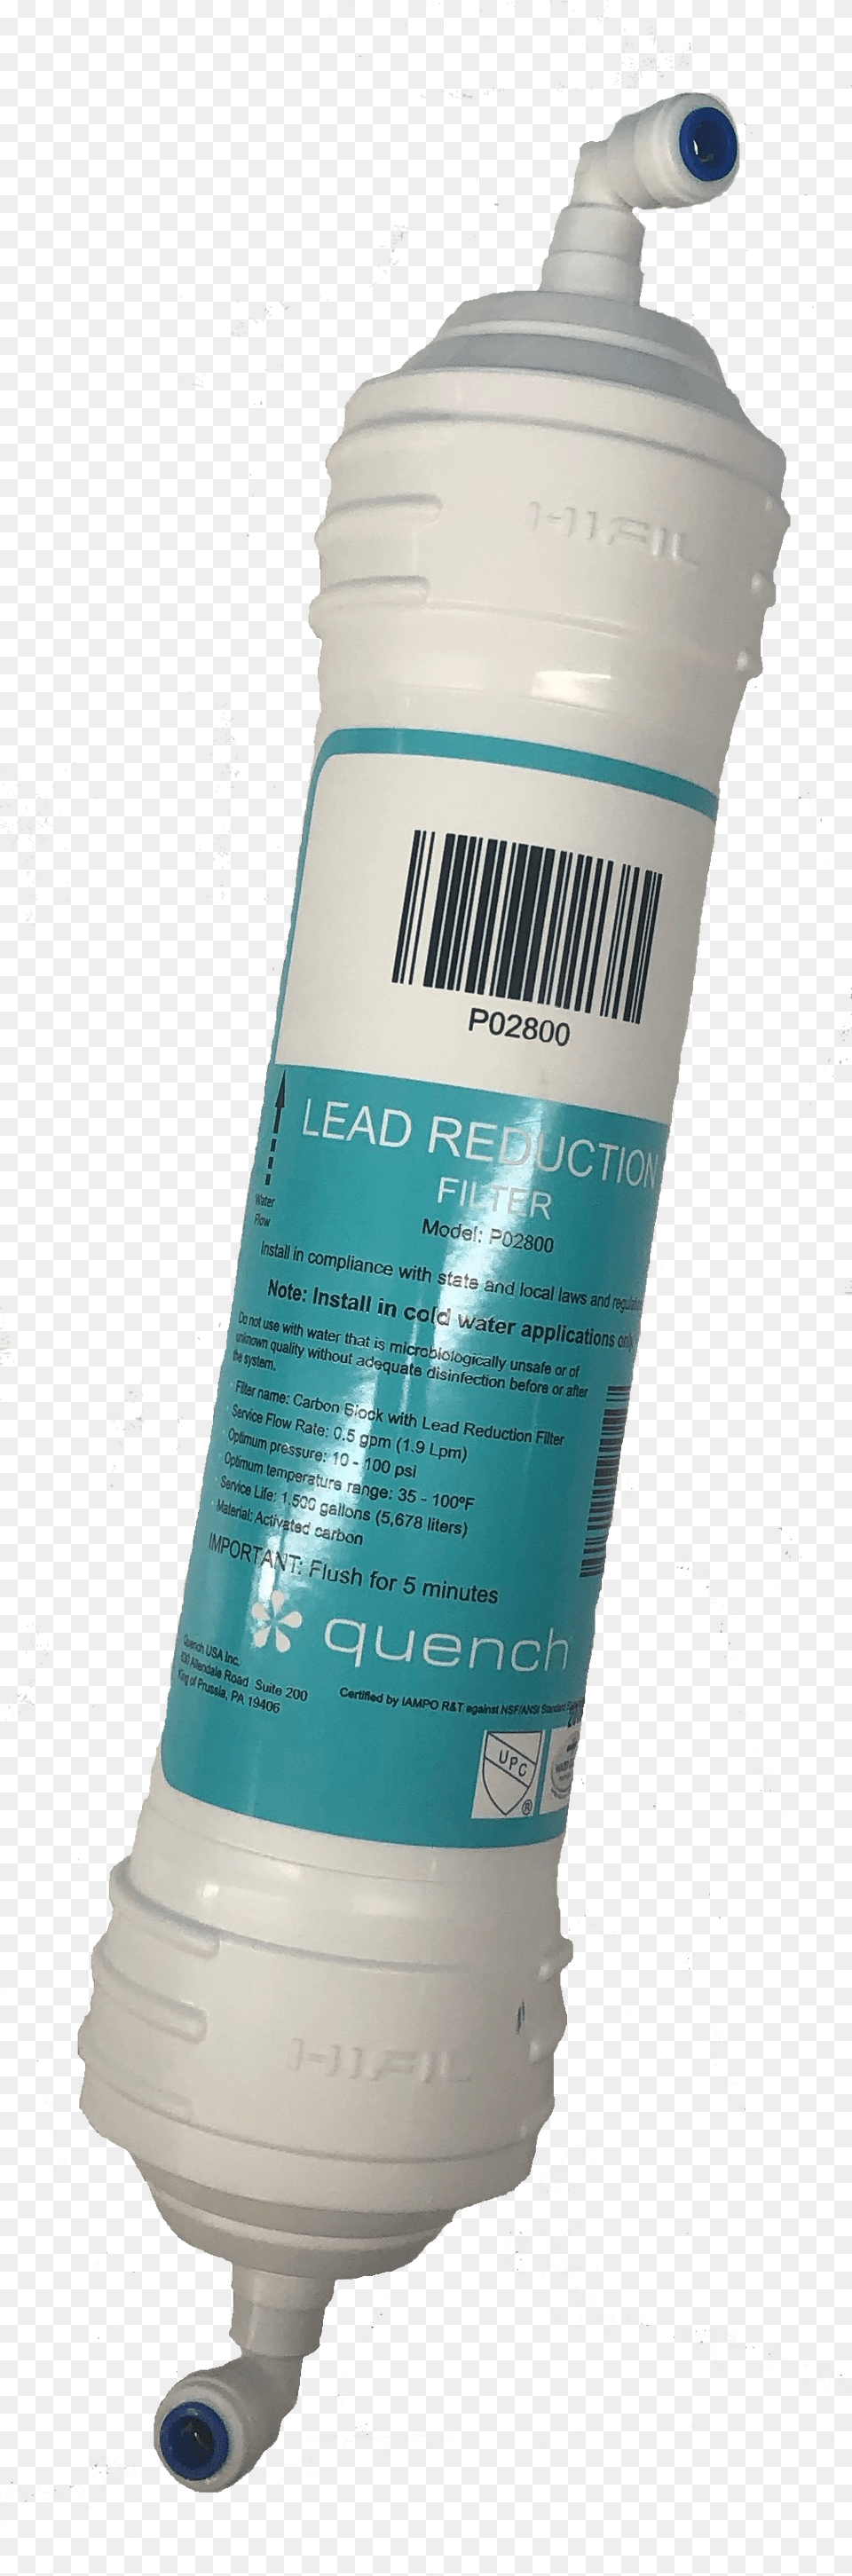 Quench Lead Reduction Filter Cosmetics, Bottle, Shaker, Machine Png Image